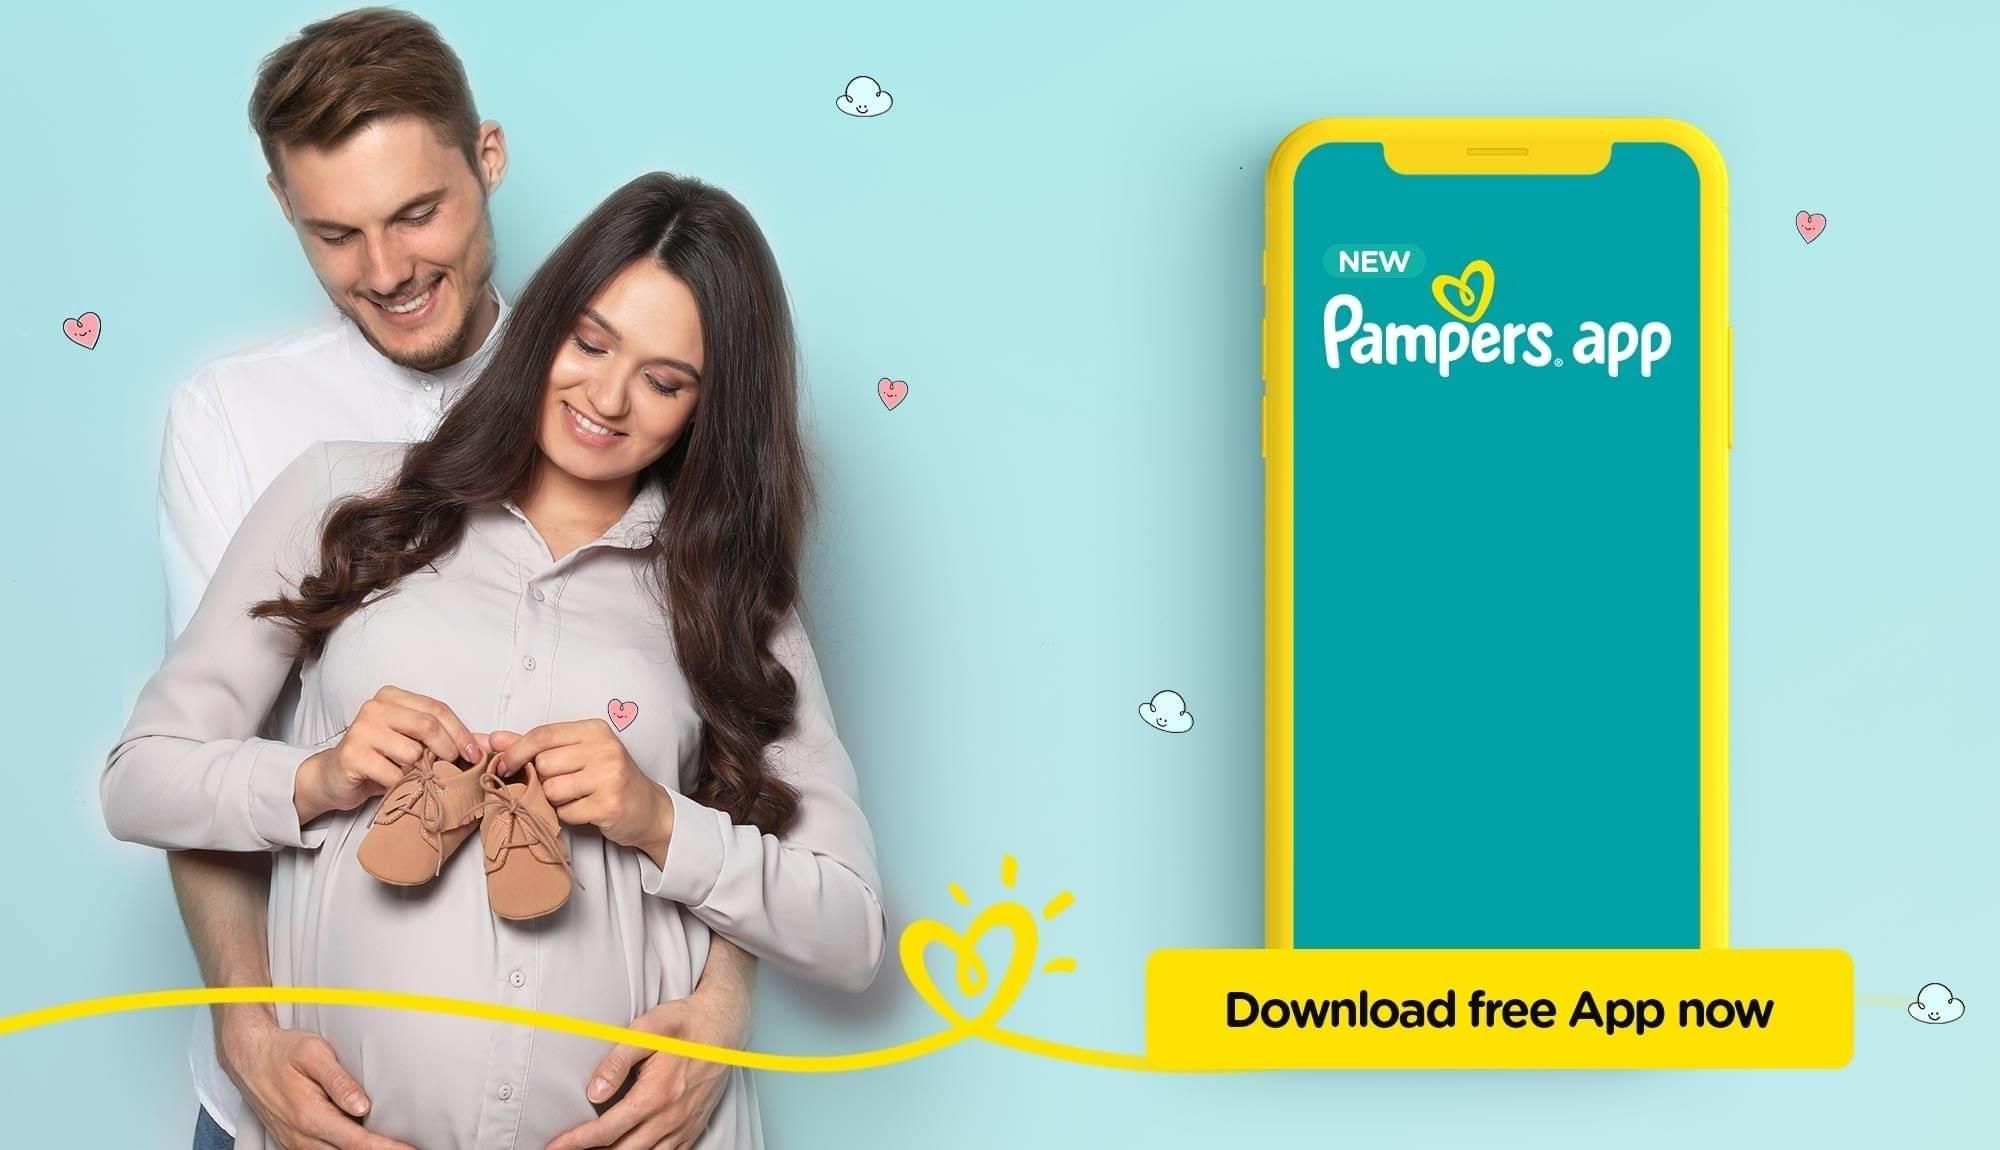 500 Tamil Baby Names for Girls with Meanings – Pampers India